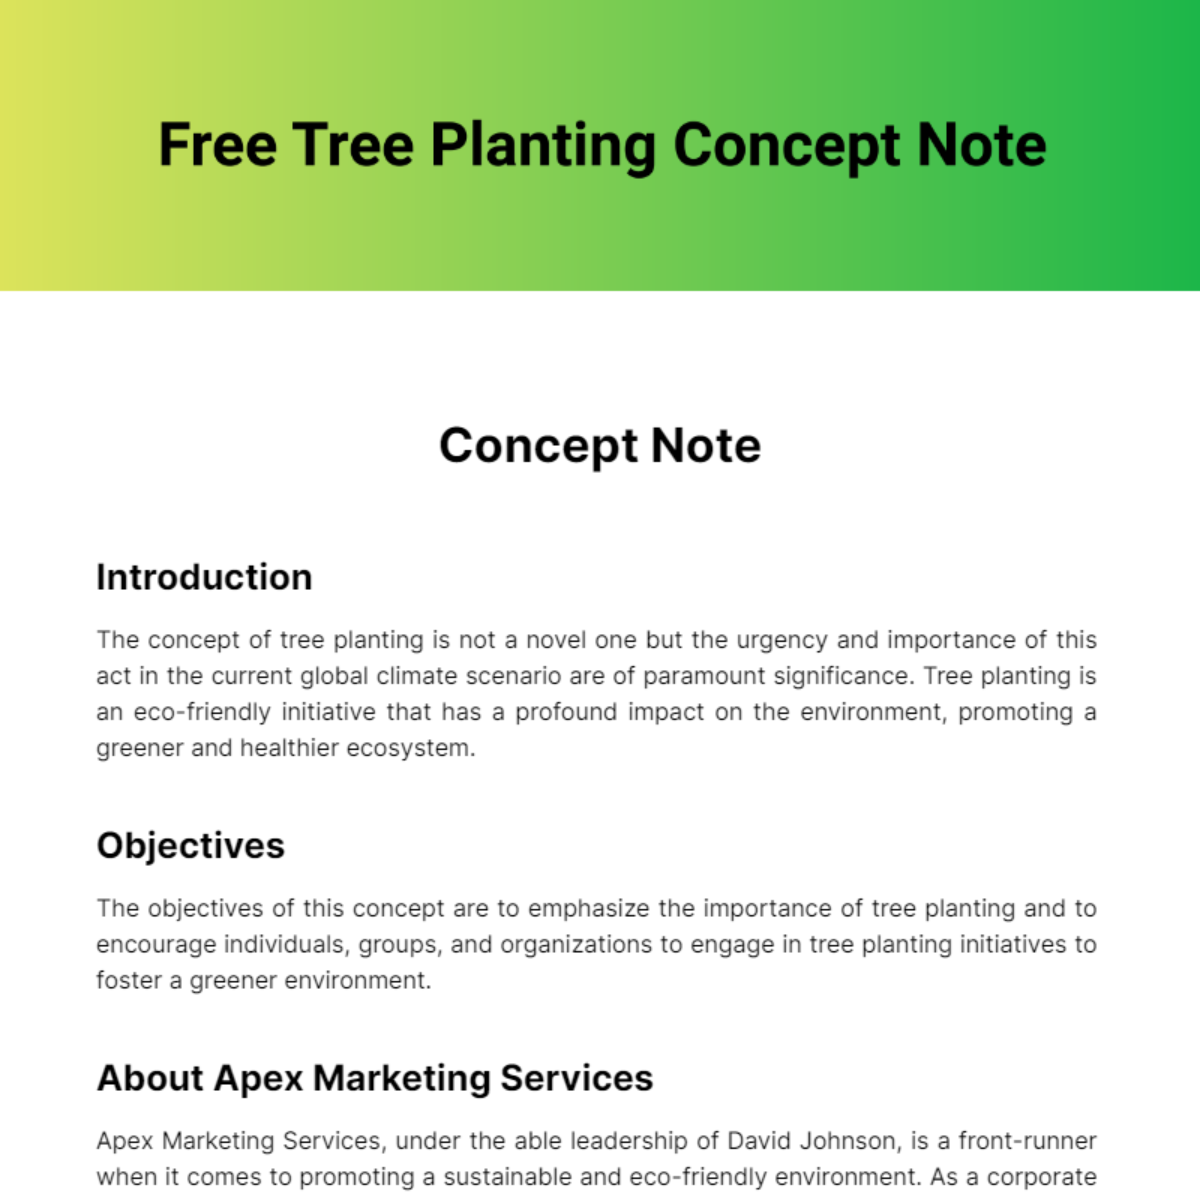 Free Tree Planting Concept Note Template